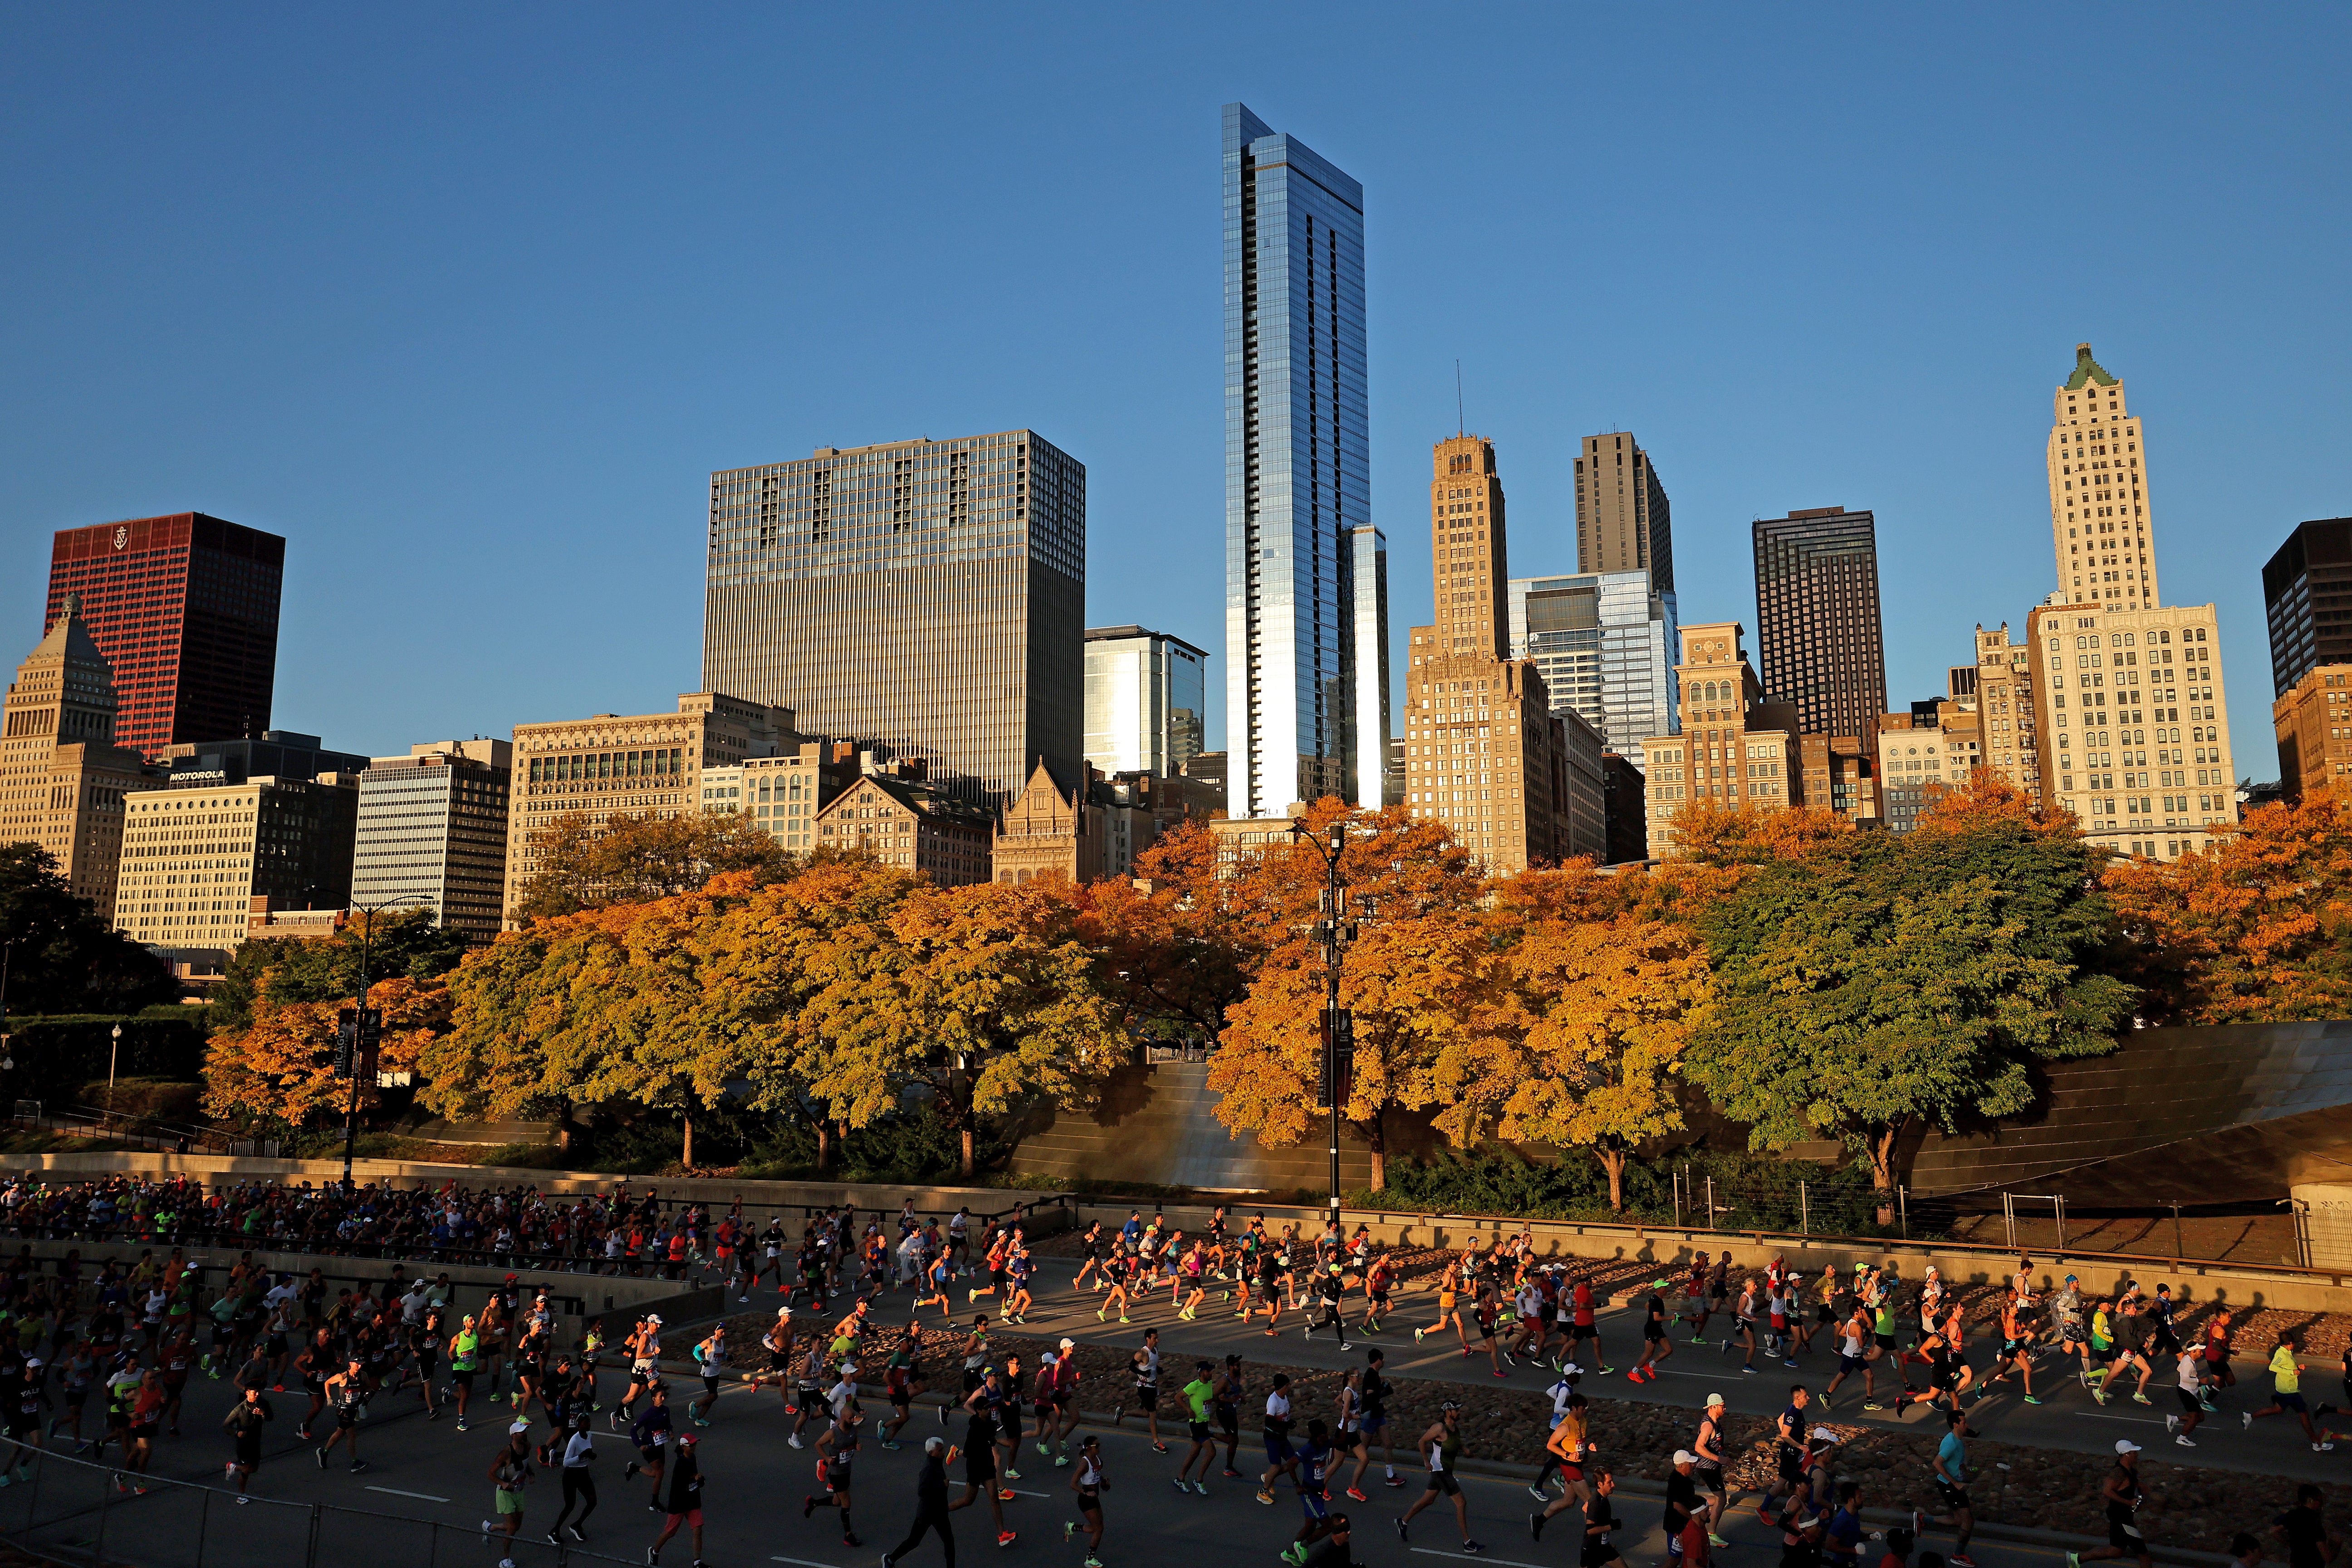 Runners compete in the 2022 Chicago Marathon